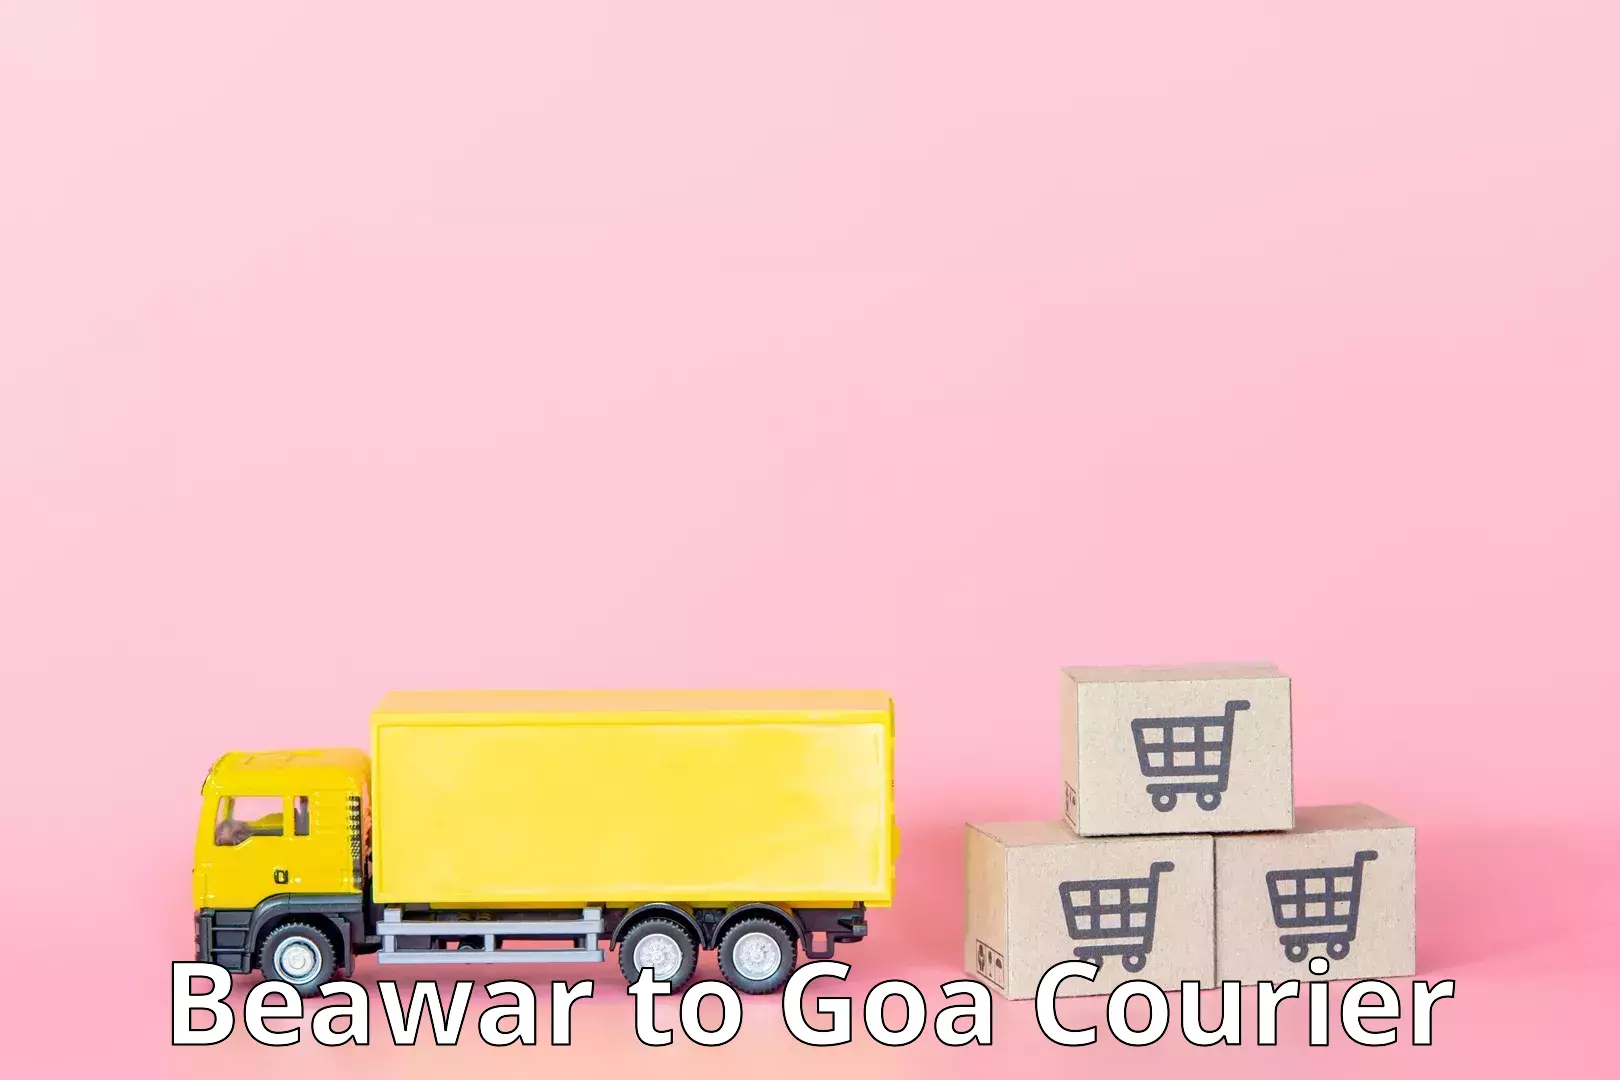 Air courier services Beawar to Bardez